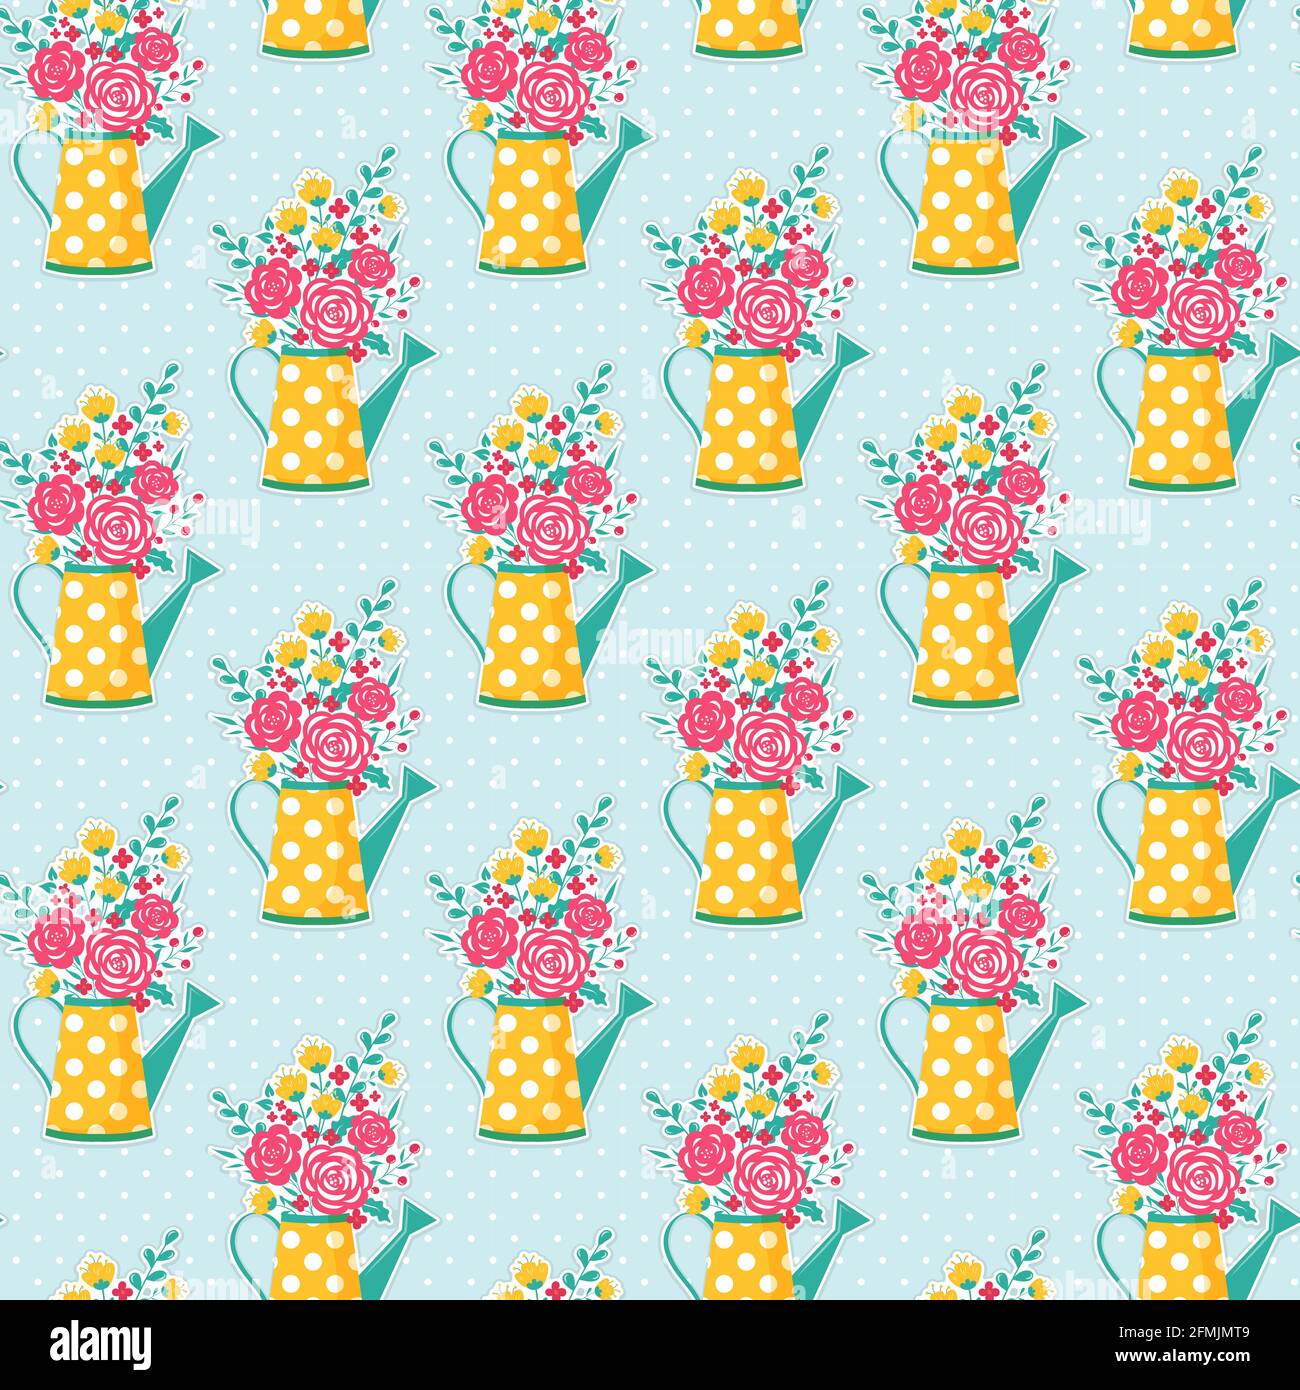 Cute seamless pattern with watering can and flowers. Polka dot background. Vector illustration. Stock Vector